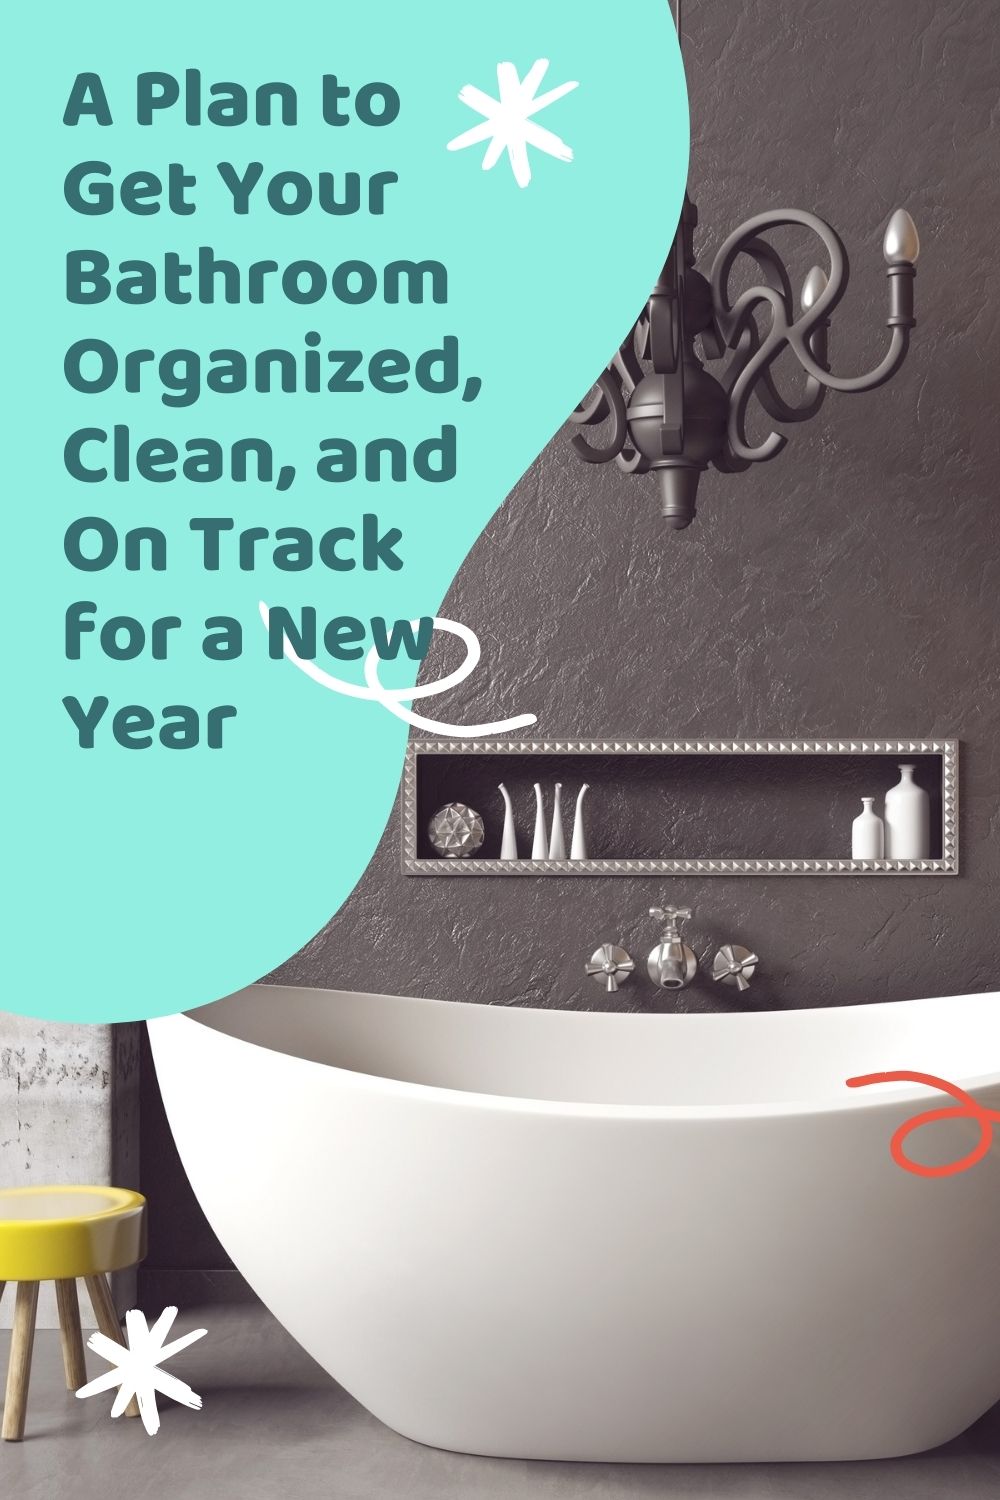 A Plan to Get Your Bathroom Organized, Clean, and On Track for a New Year